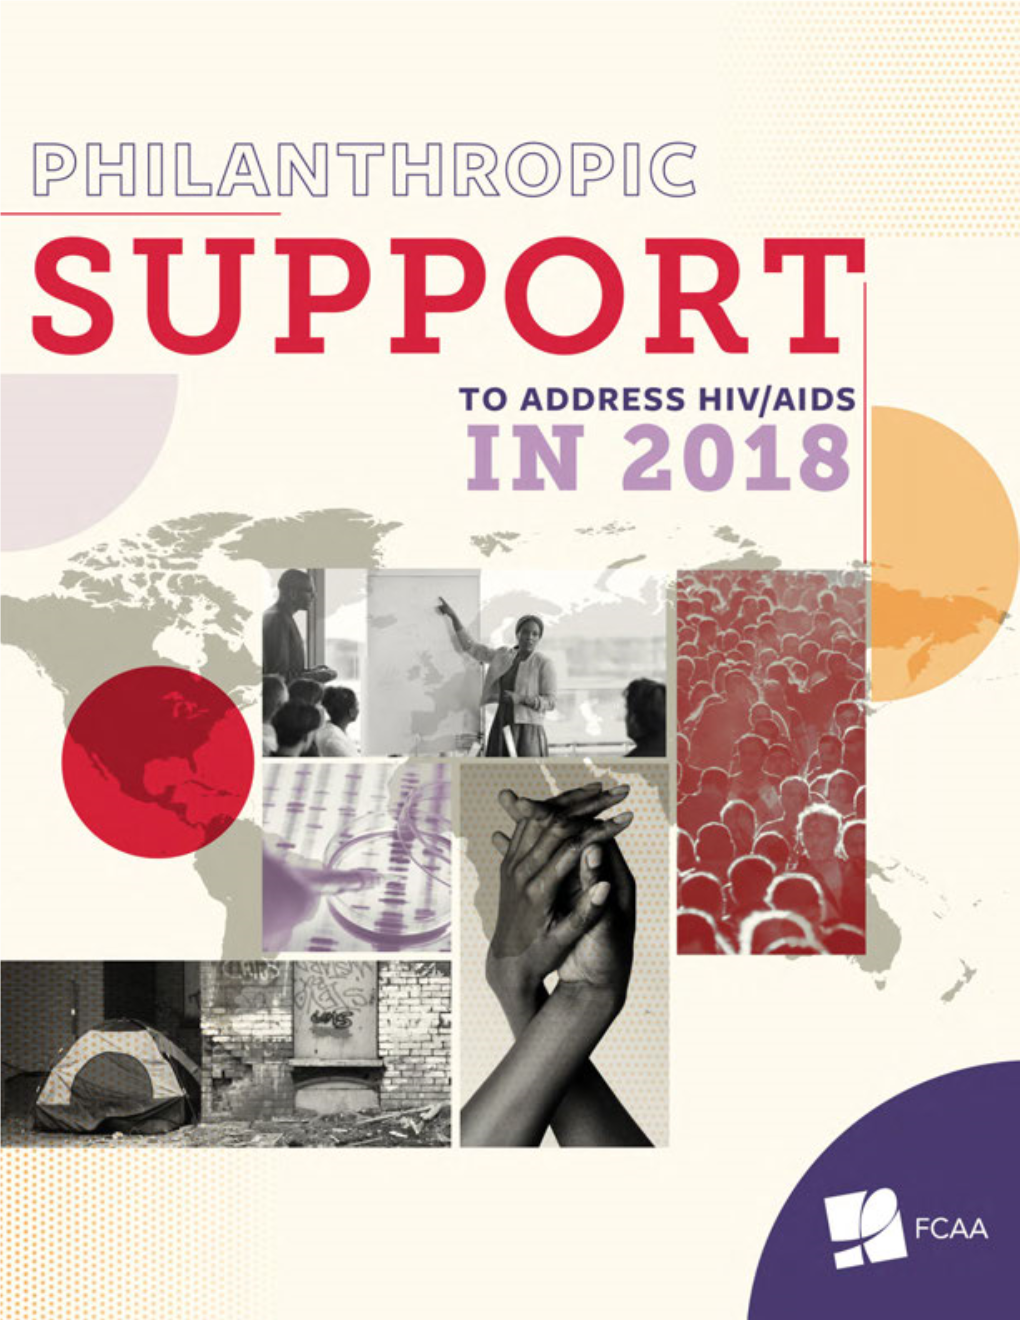 Philanthropic Support to Address HIV/AIDS